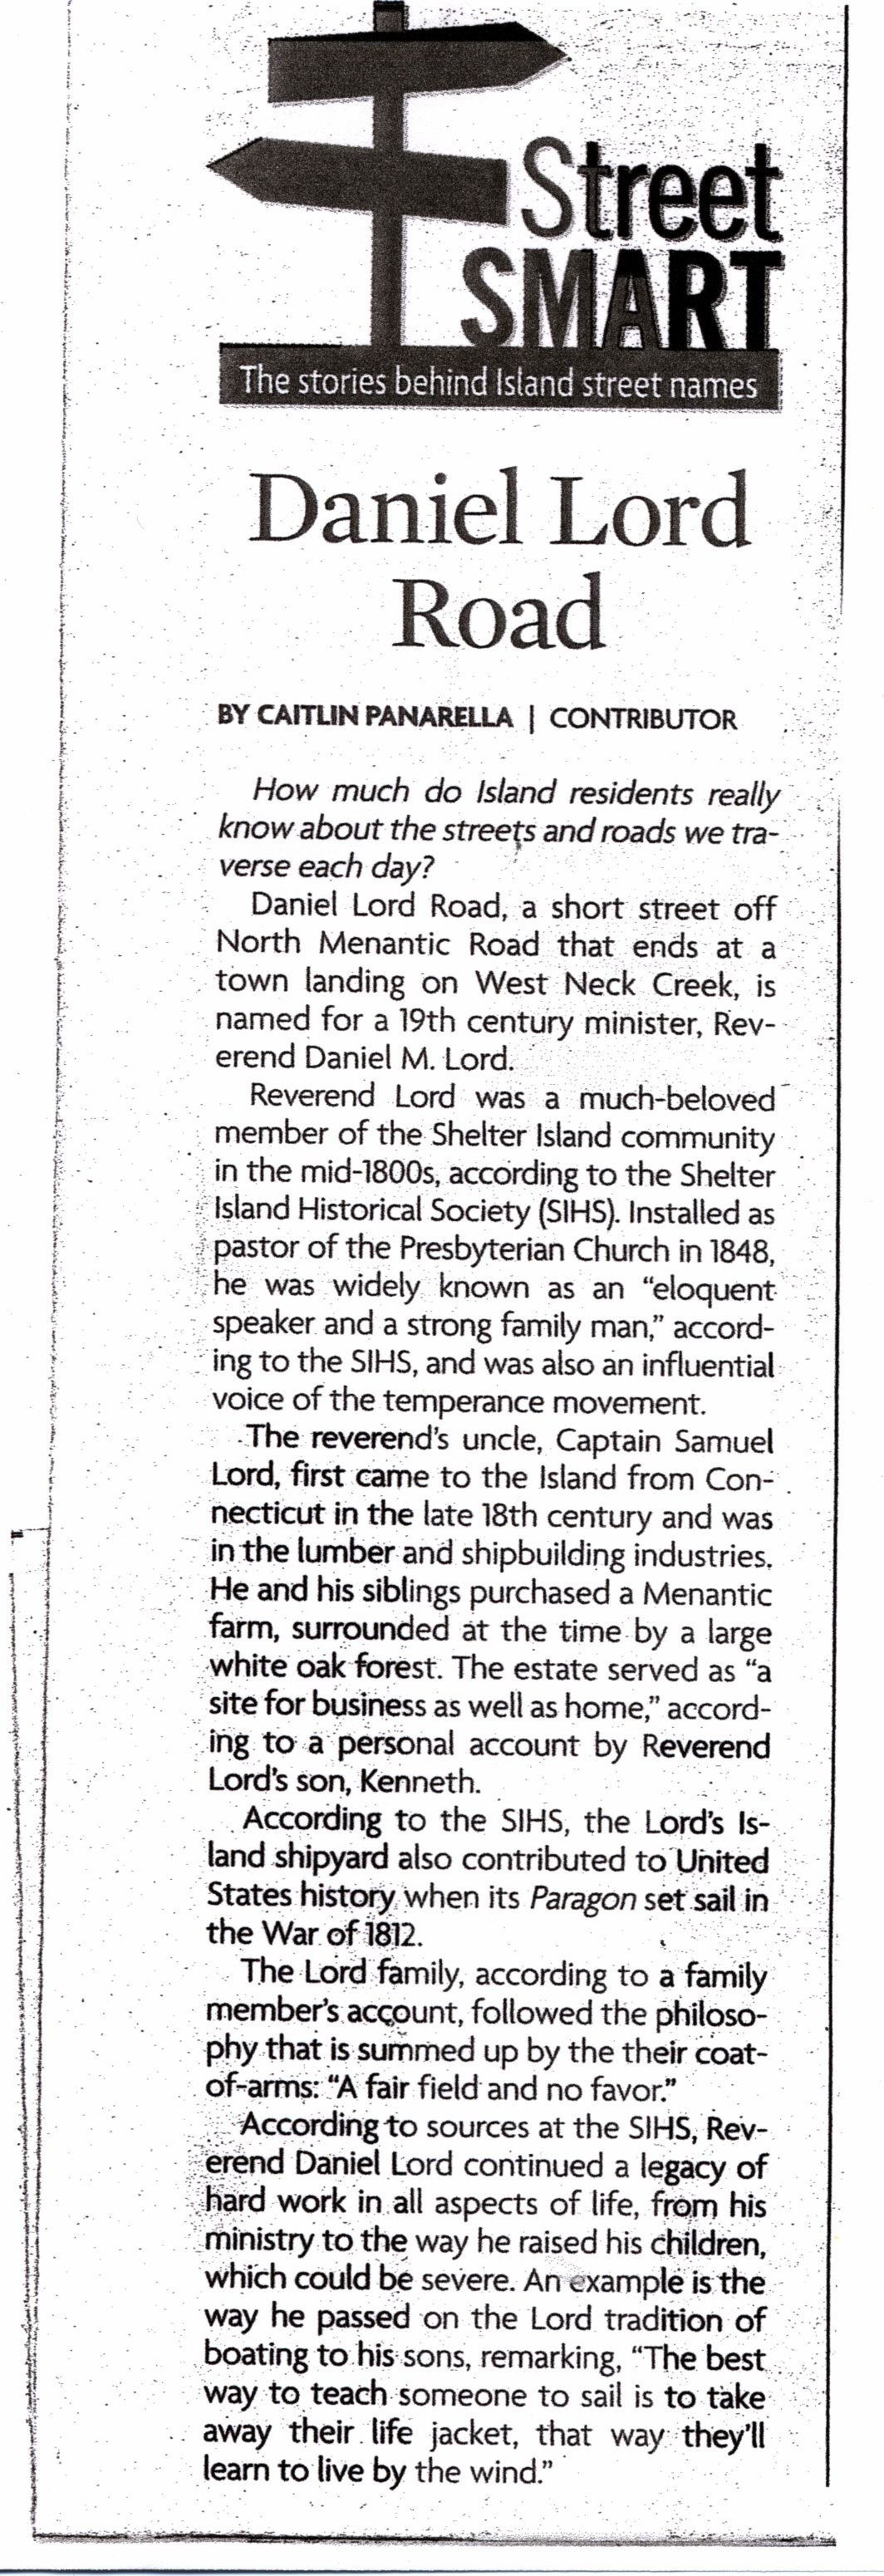 Article from the Shelter Island Reporter featuring the history behind Daniel Lord Road